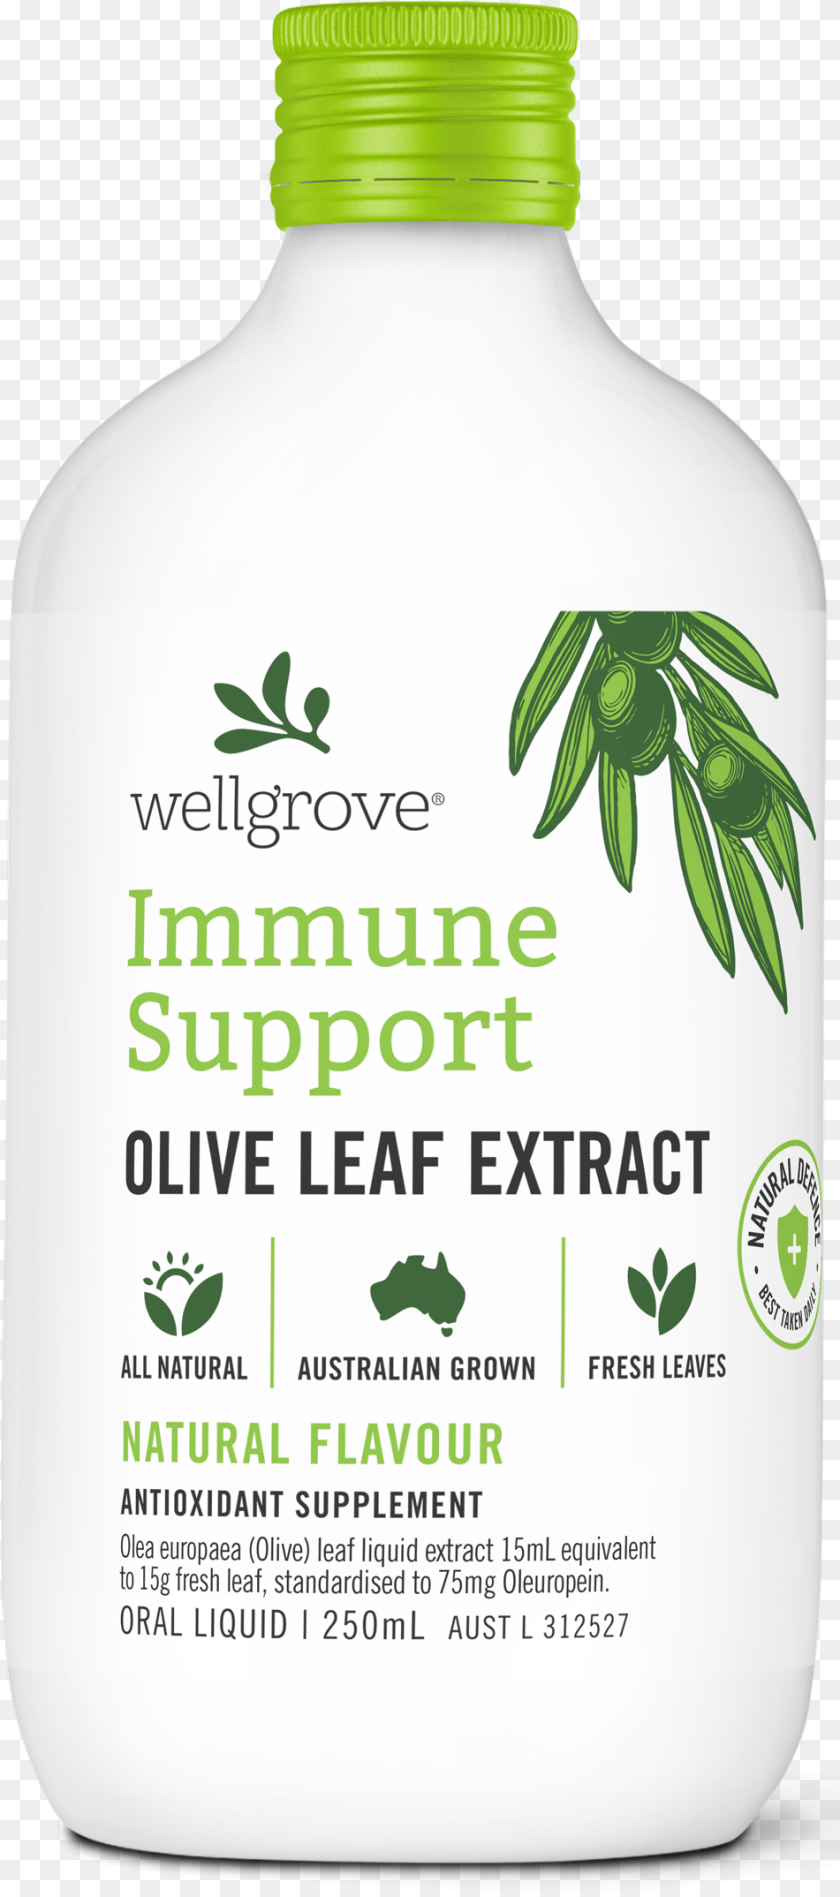 951x2148 Wellgrove Immune Support Olive Leaf Extract, Herbal, Herbs, Plant, Bottle Clipart PNG